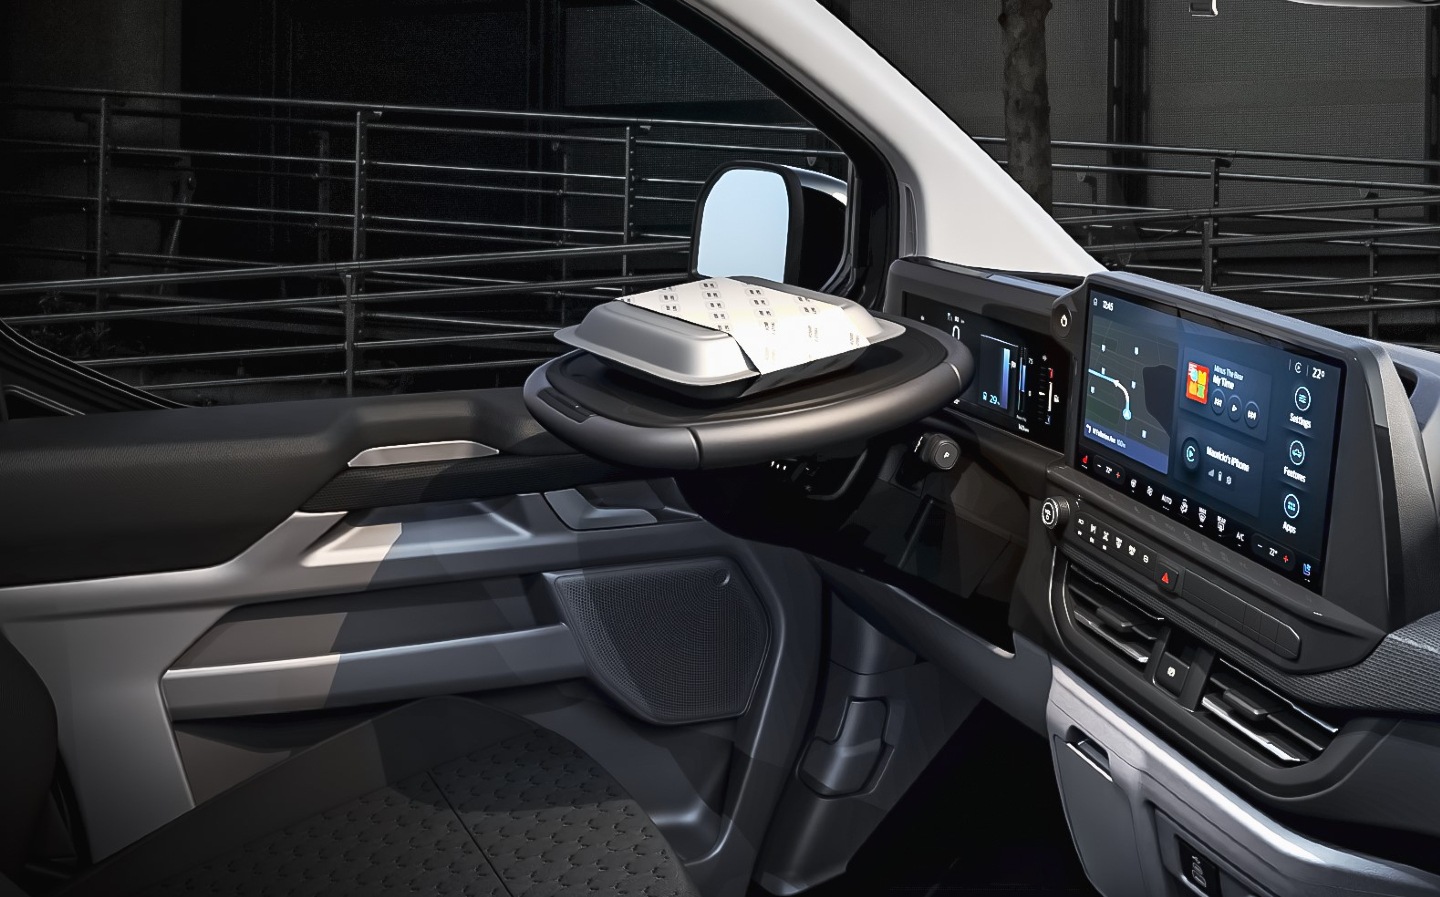 New Transit van has a tilting steering wheel that acts as a meal tray or laptop stand